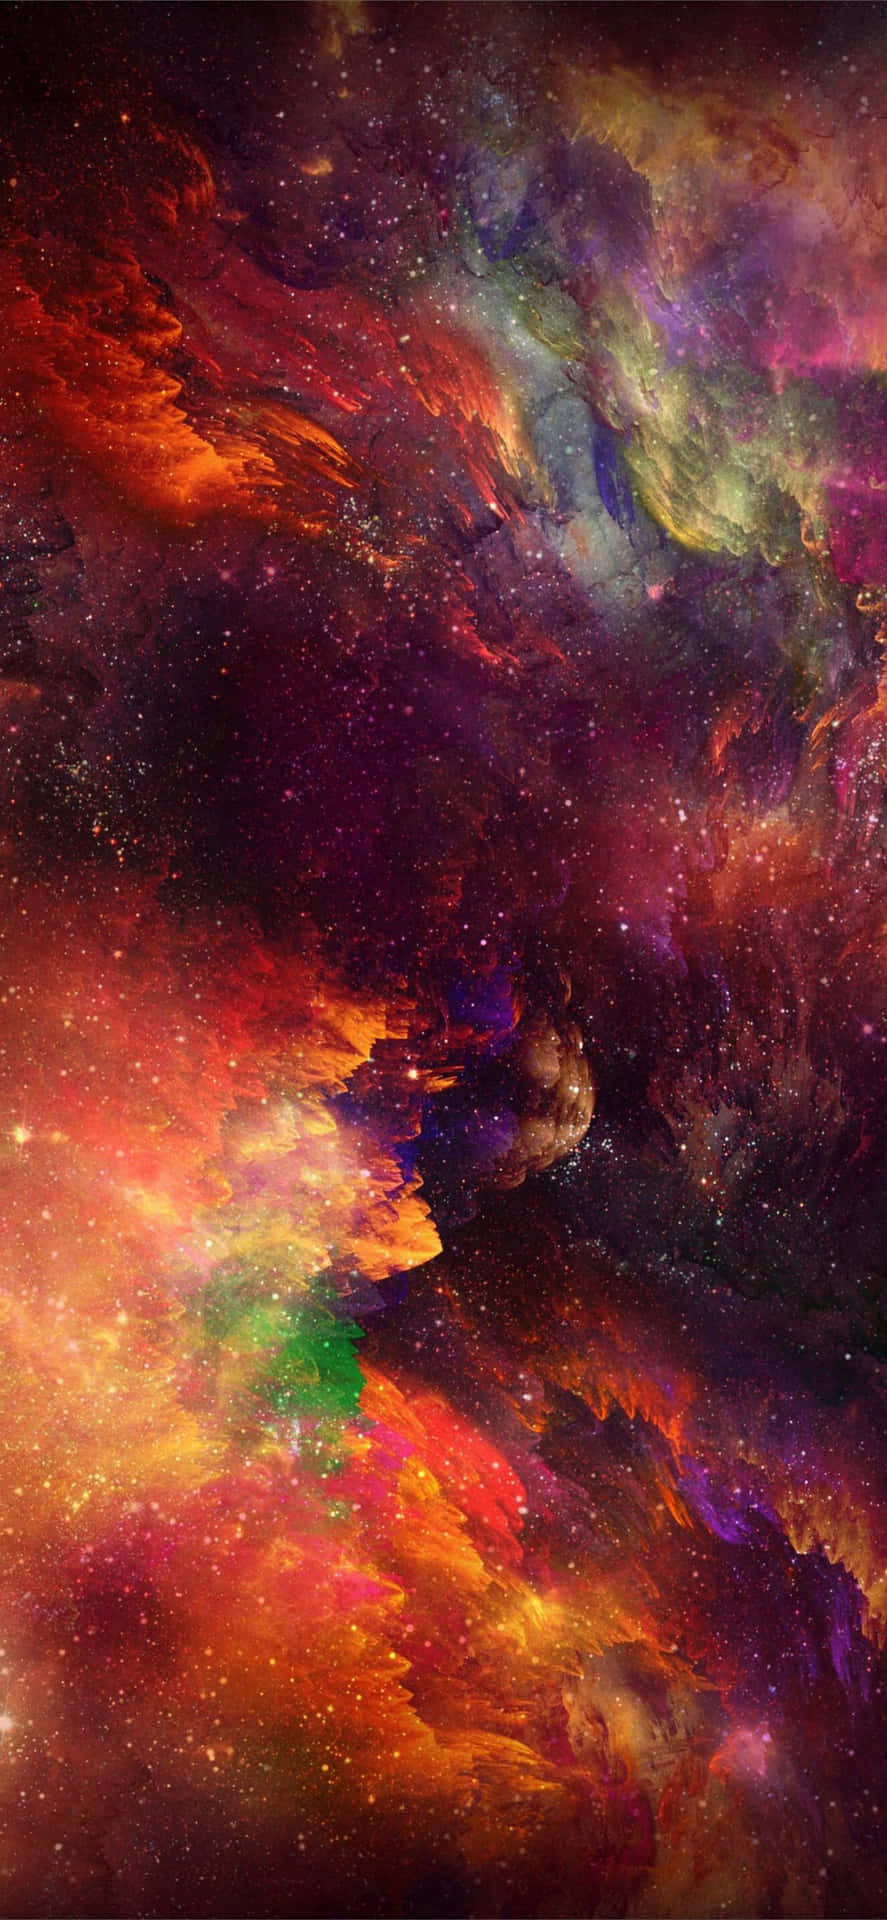 Marvel At The Magnificence Of Our Universe With An Iphone Xr Wallpaper